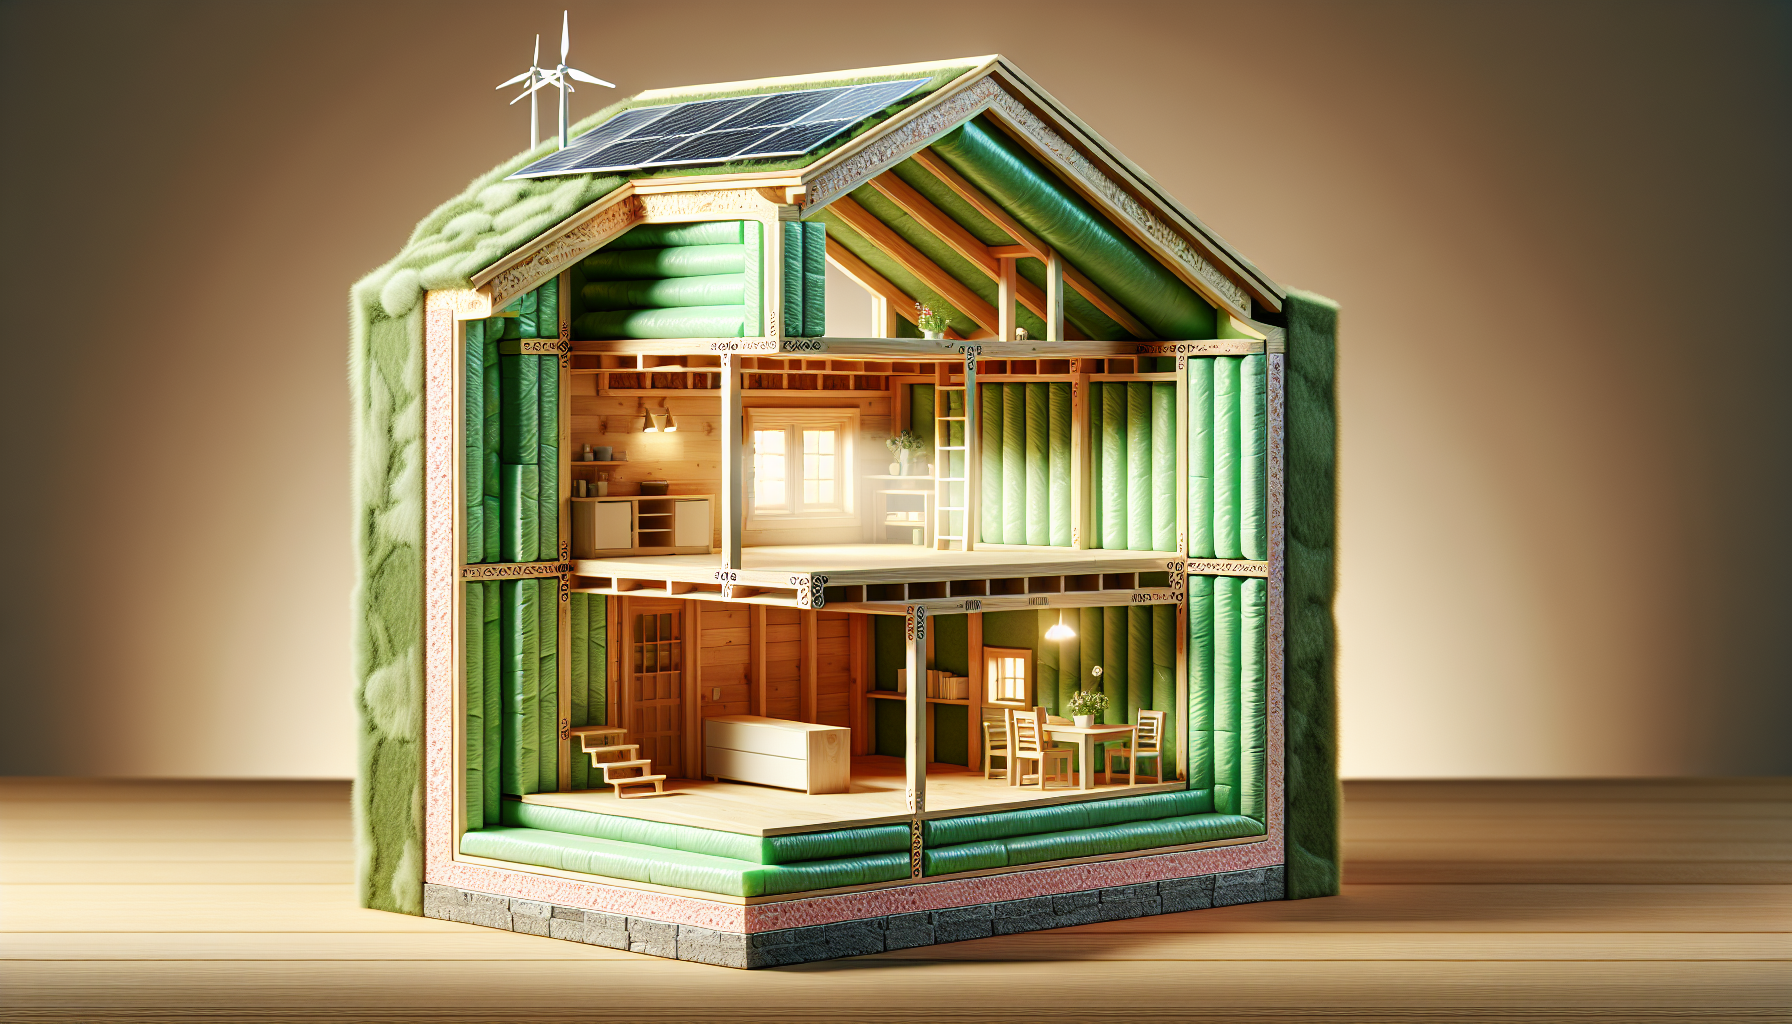 Energy-efficient timber frame house